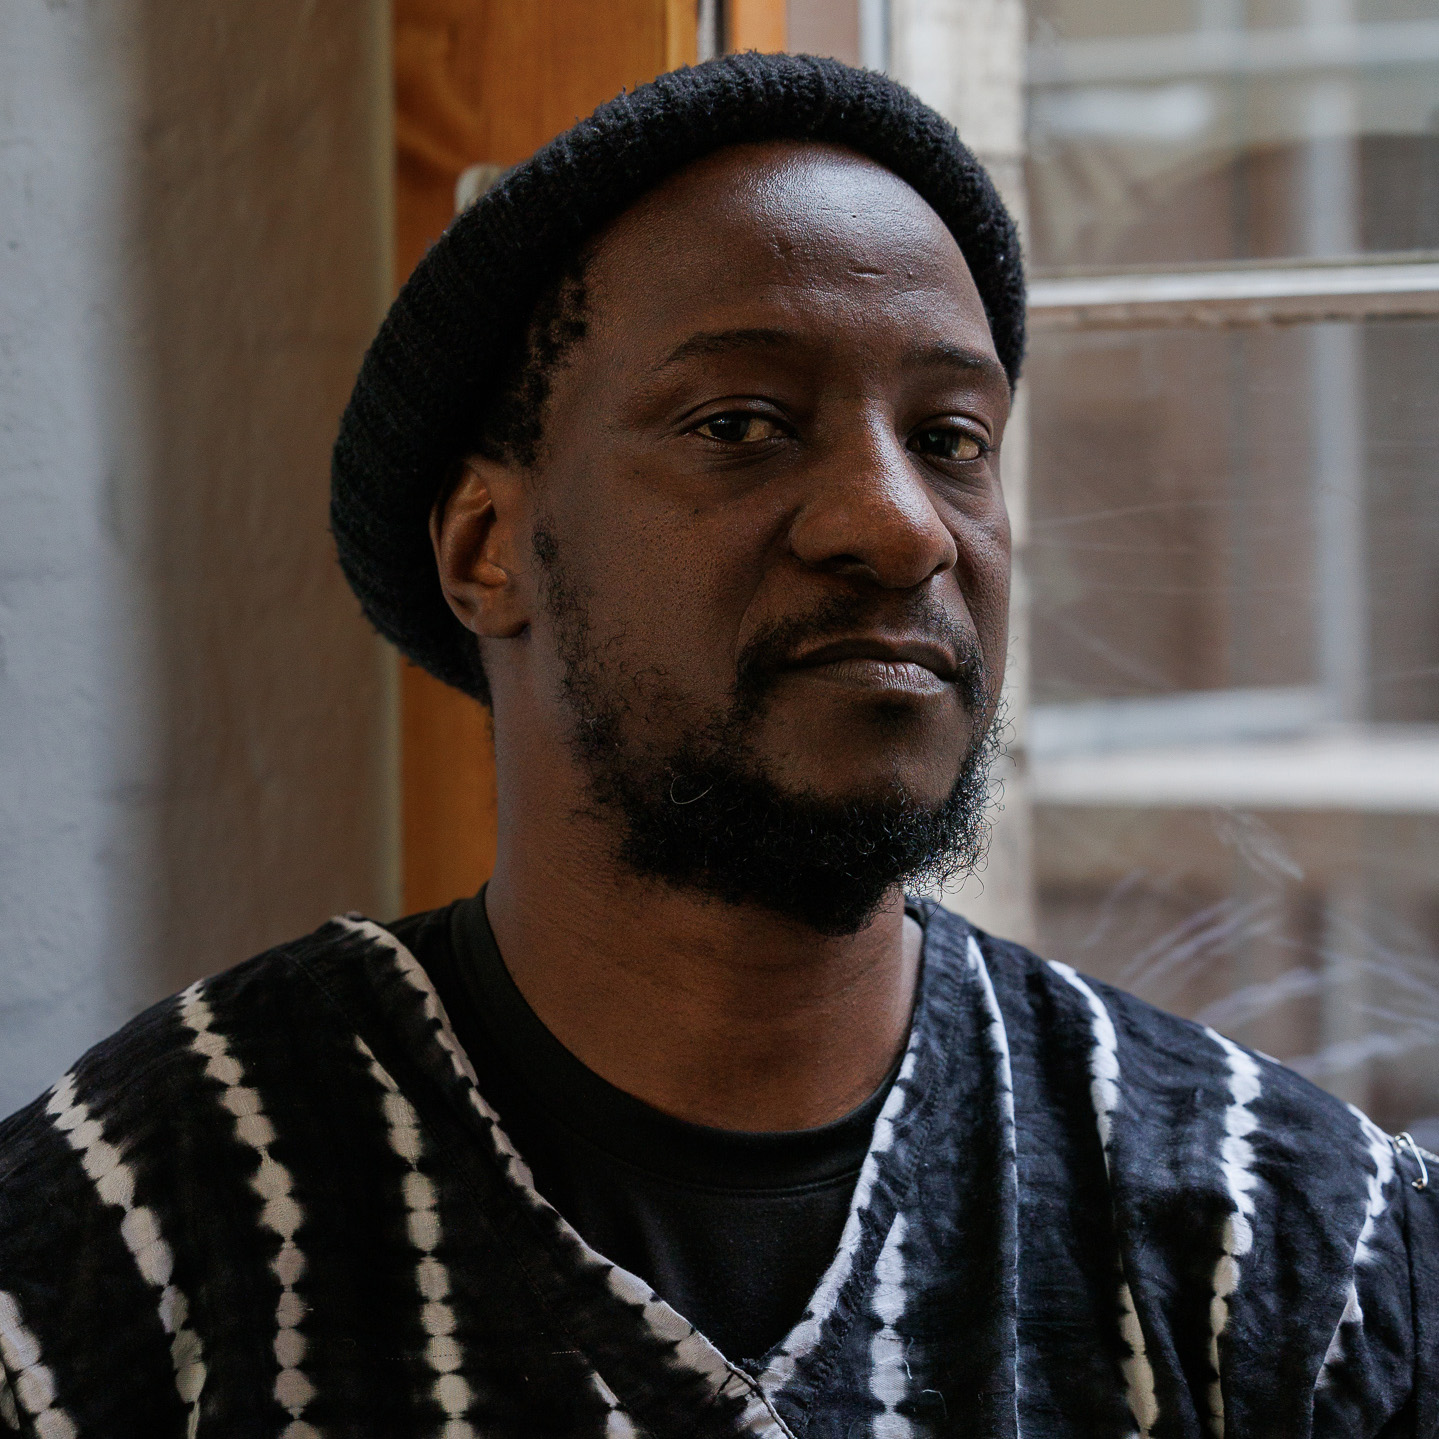 A black man slightly smiles. He is in front of a window with back lighting and wearing a small beanie